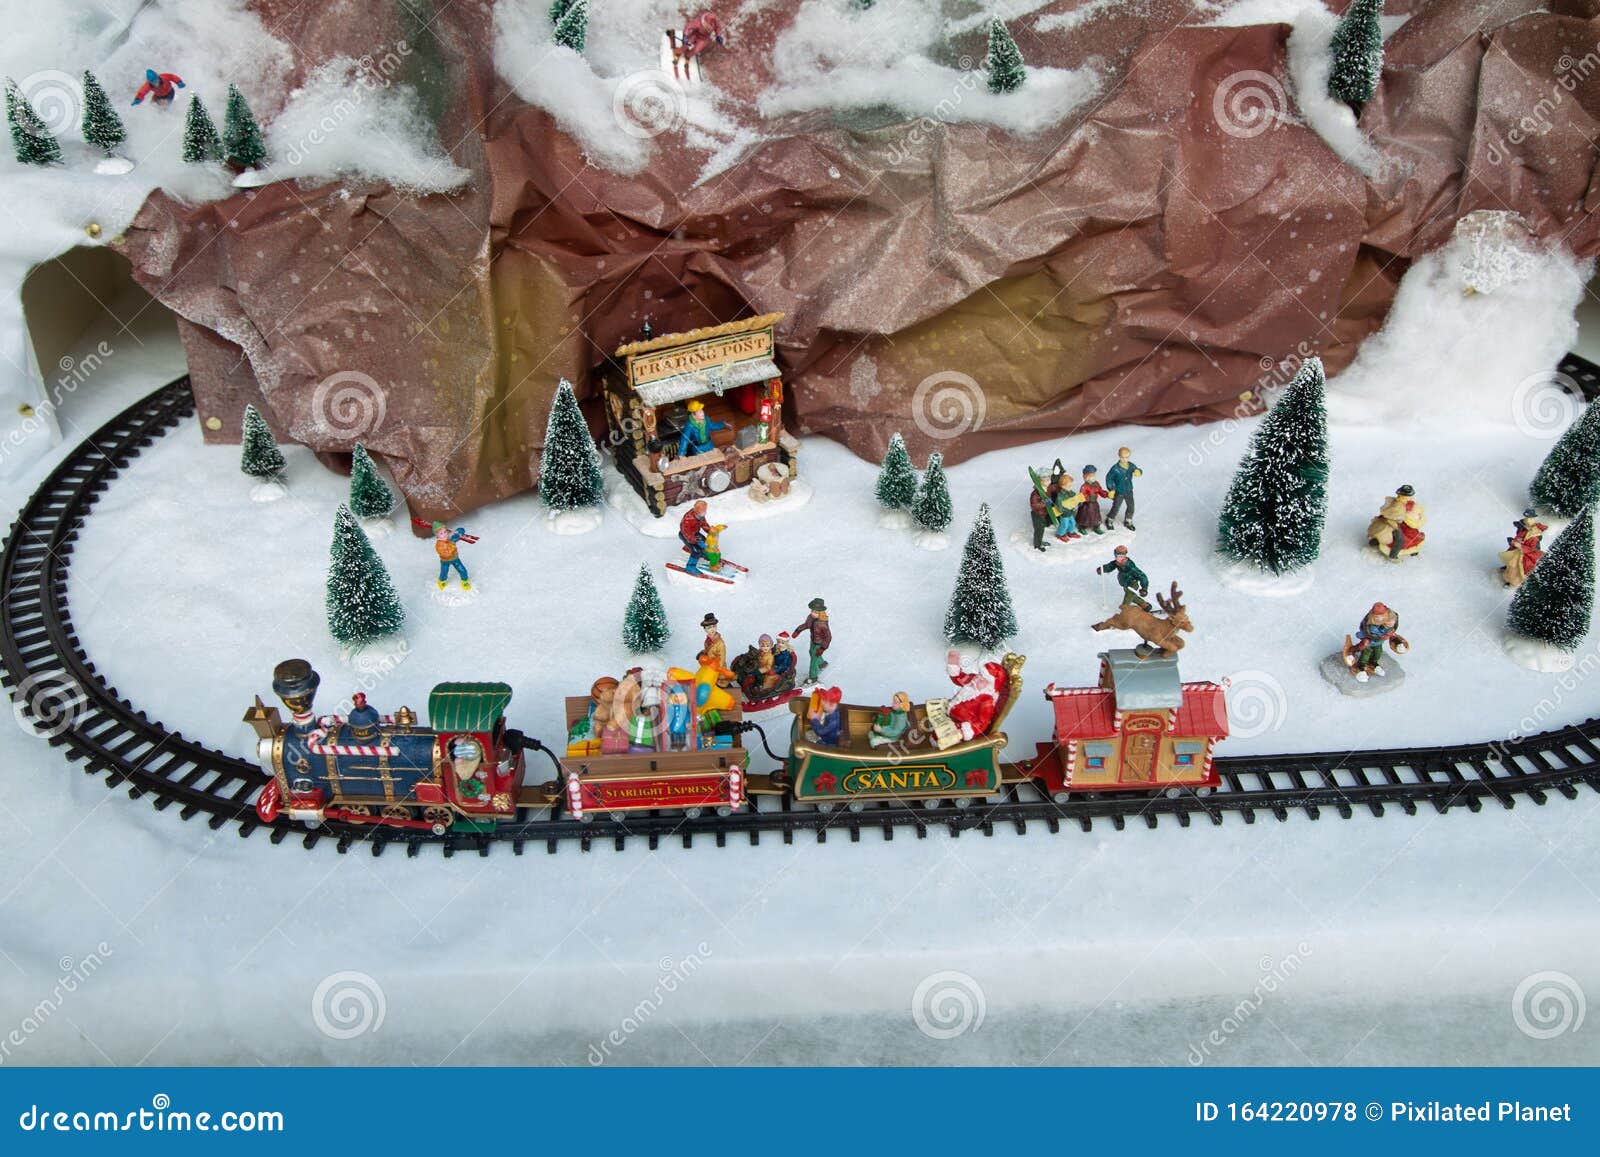 Miniature Village Model Used for Christmas Decoration Stock Photo ...